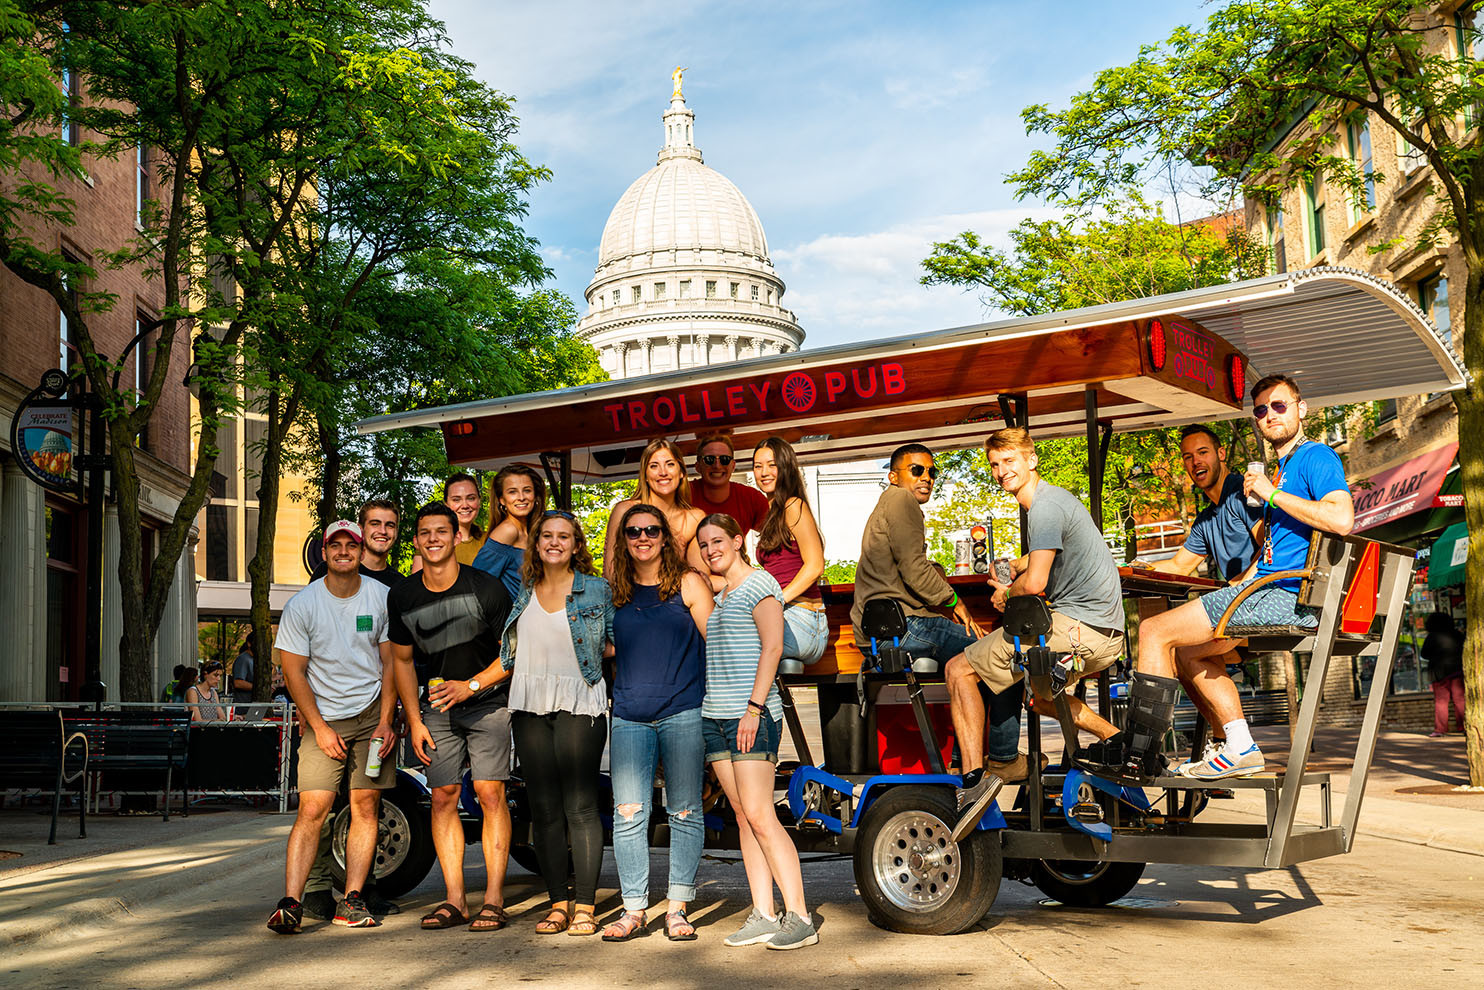 Bachelorette Party Ideas Madison Wi
 Our Top 7 Favorite Bachelorette Ideas in Madison Trolley